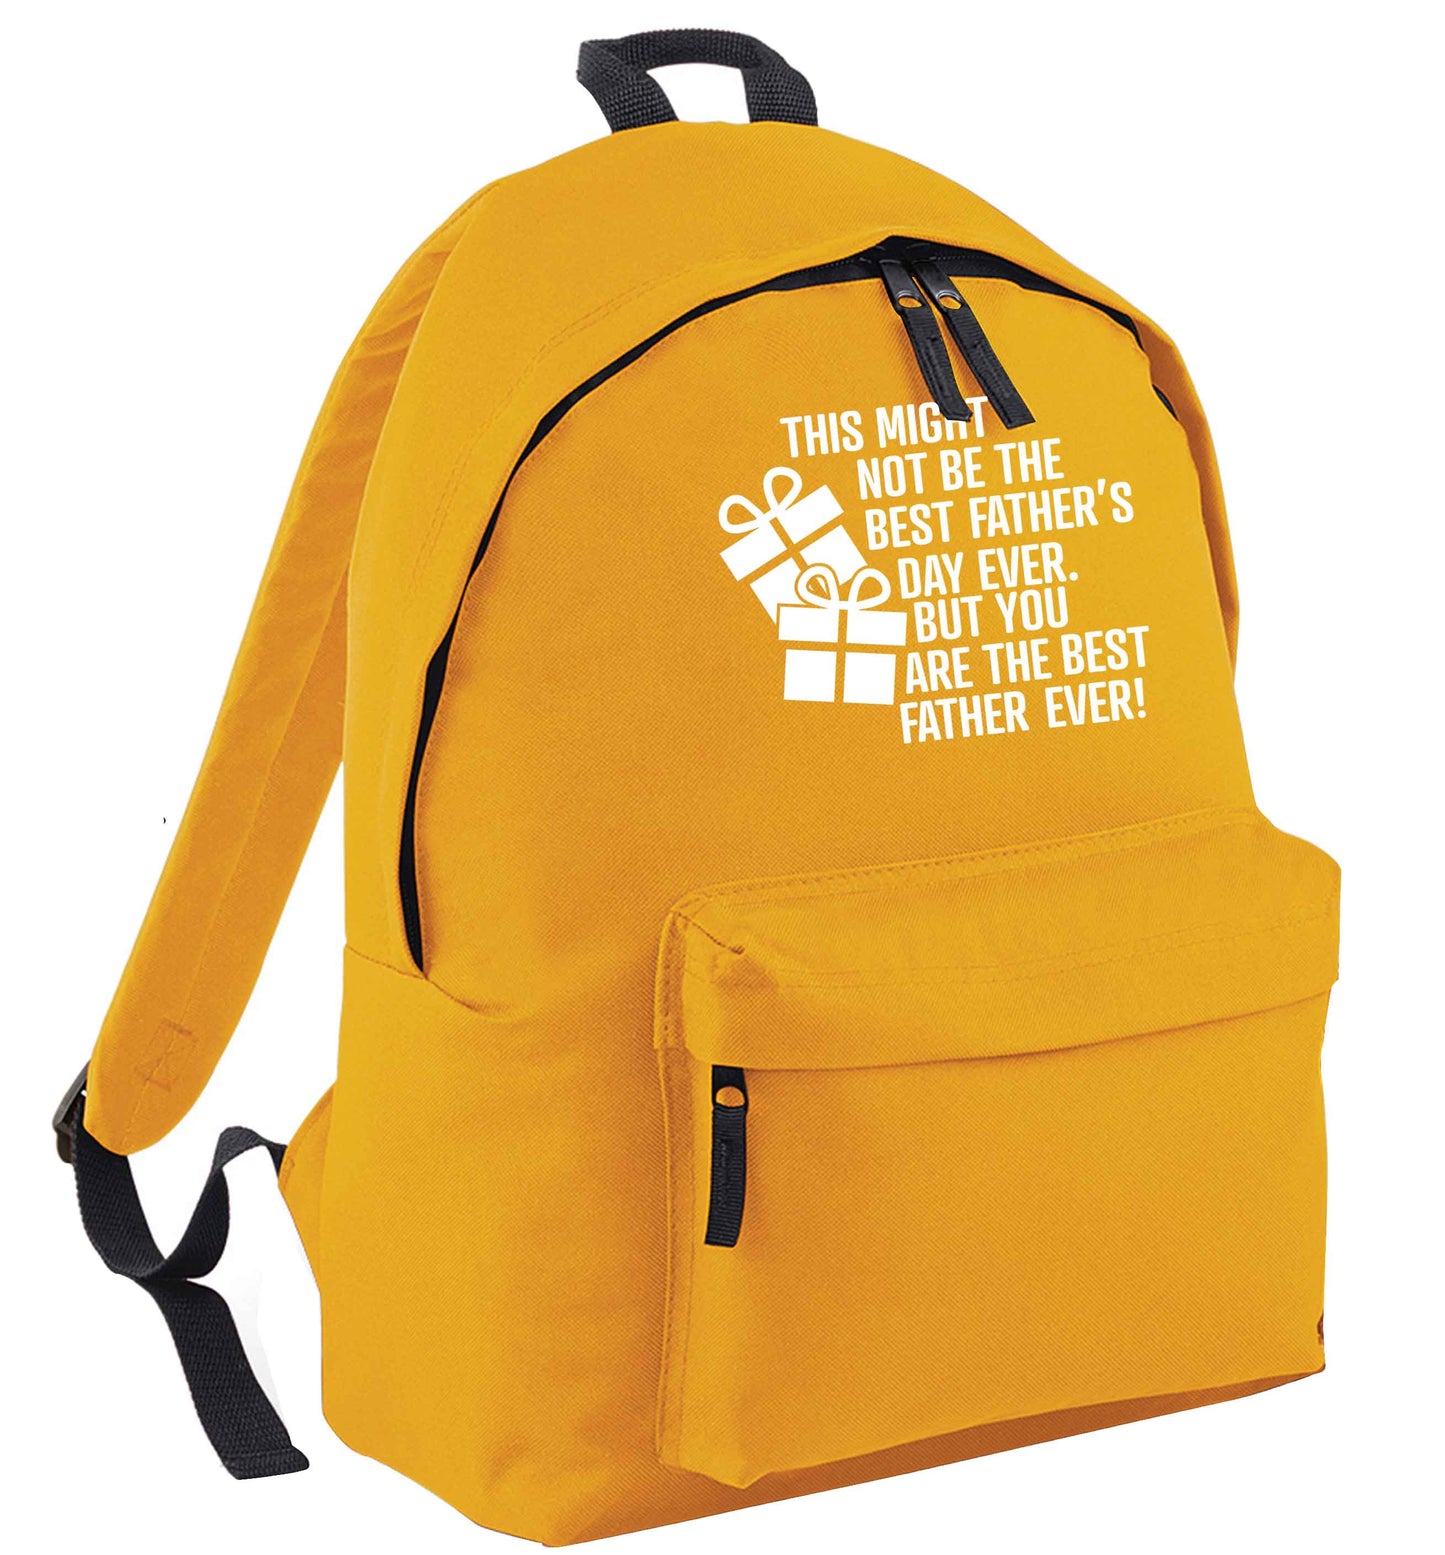 It might not be the best Father's Day ever but you are the best father ever! mustard adults backpack